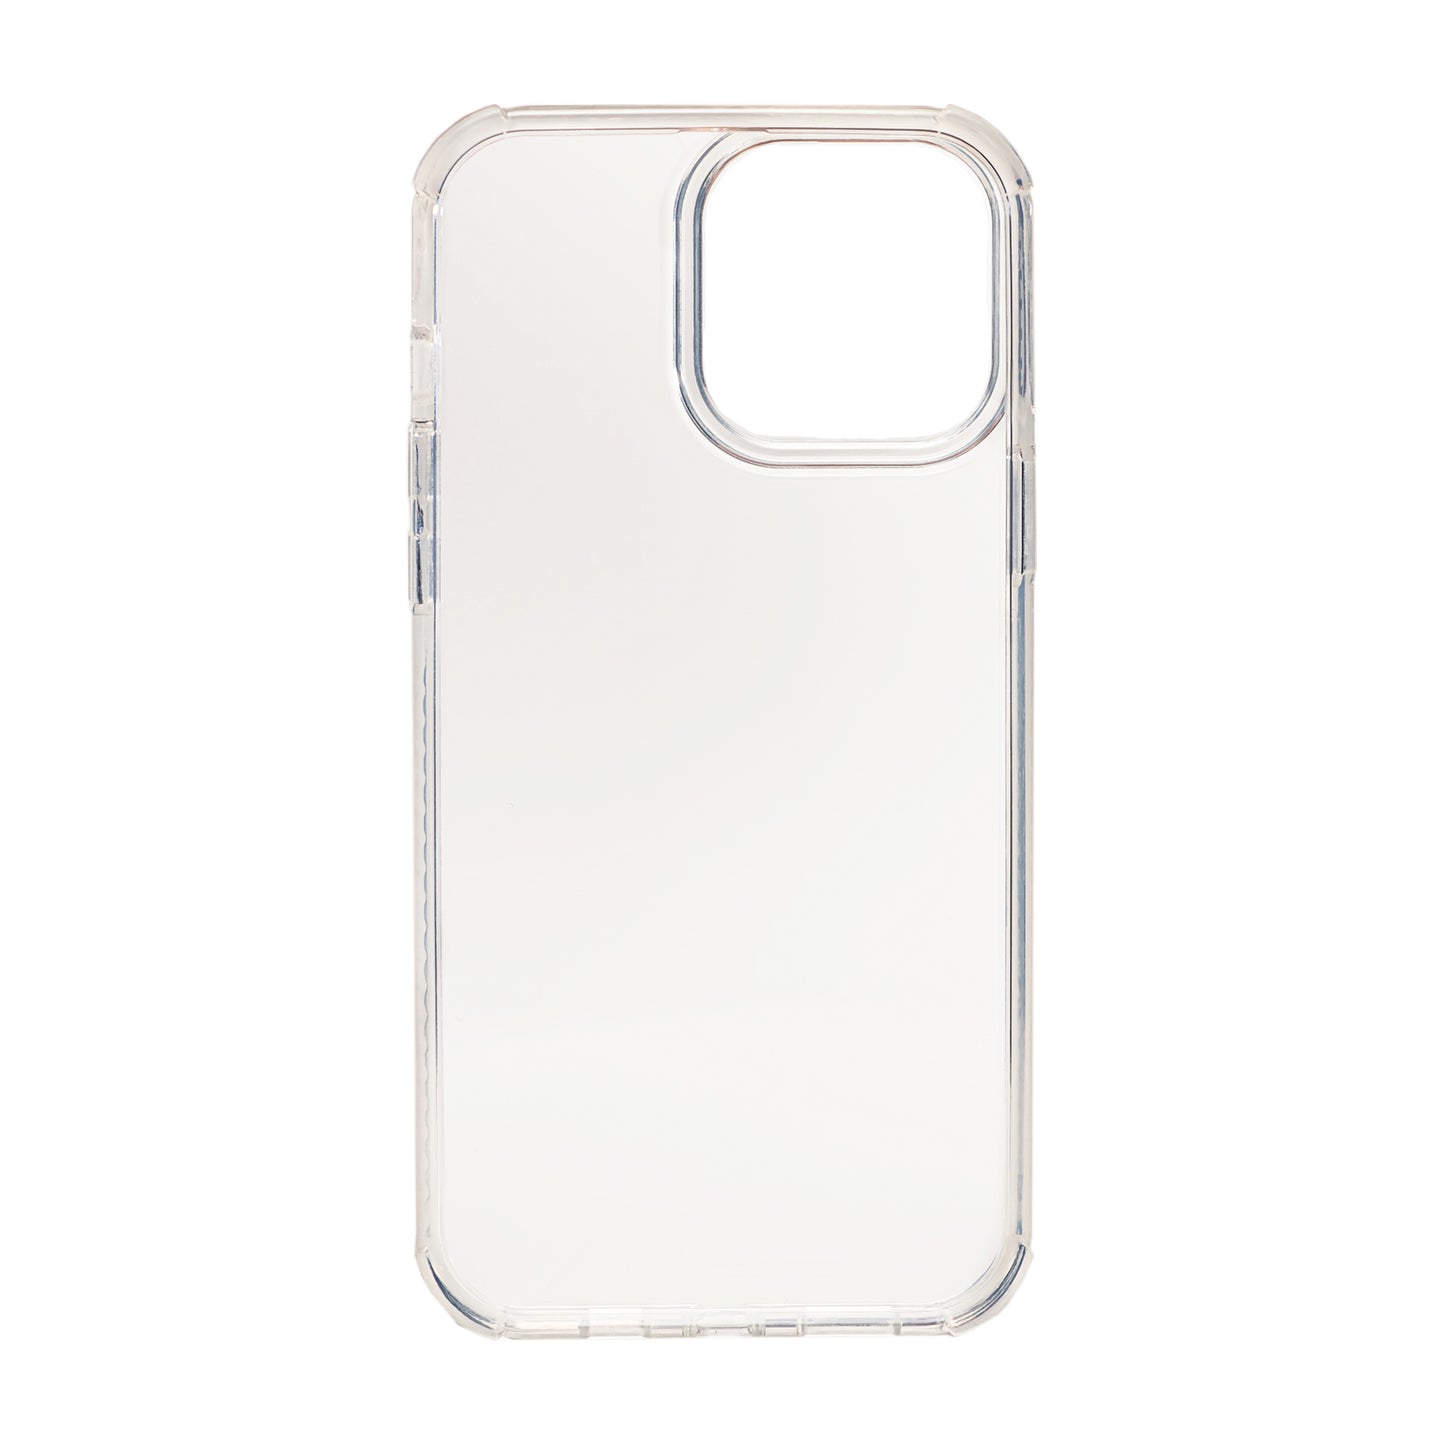 iPhone 13 Pro Max Spectrum SPECShield Rugged Case - Clear/Frost - 15-09298